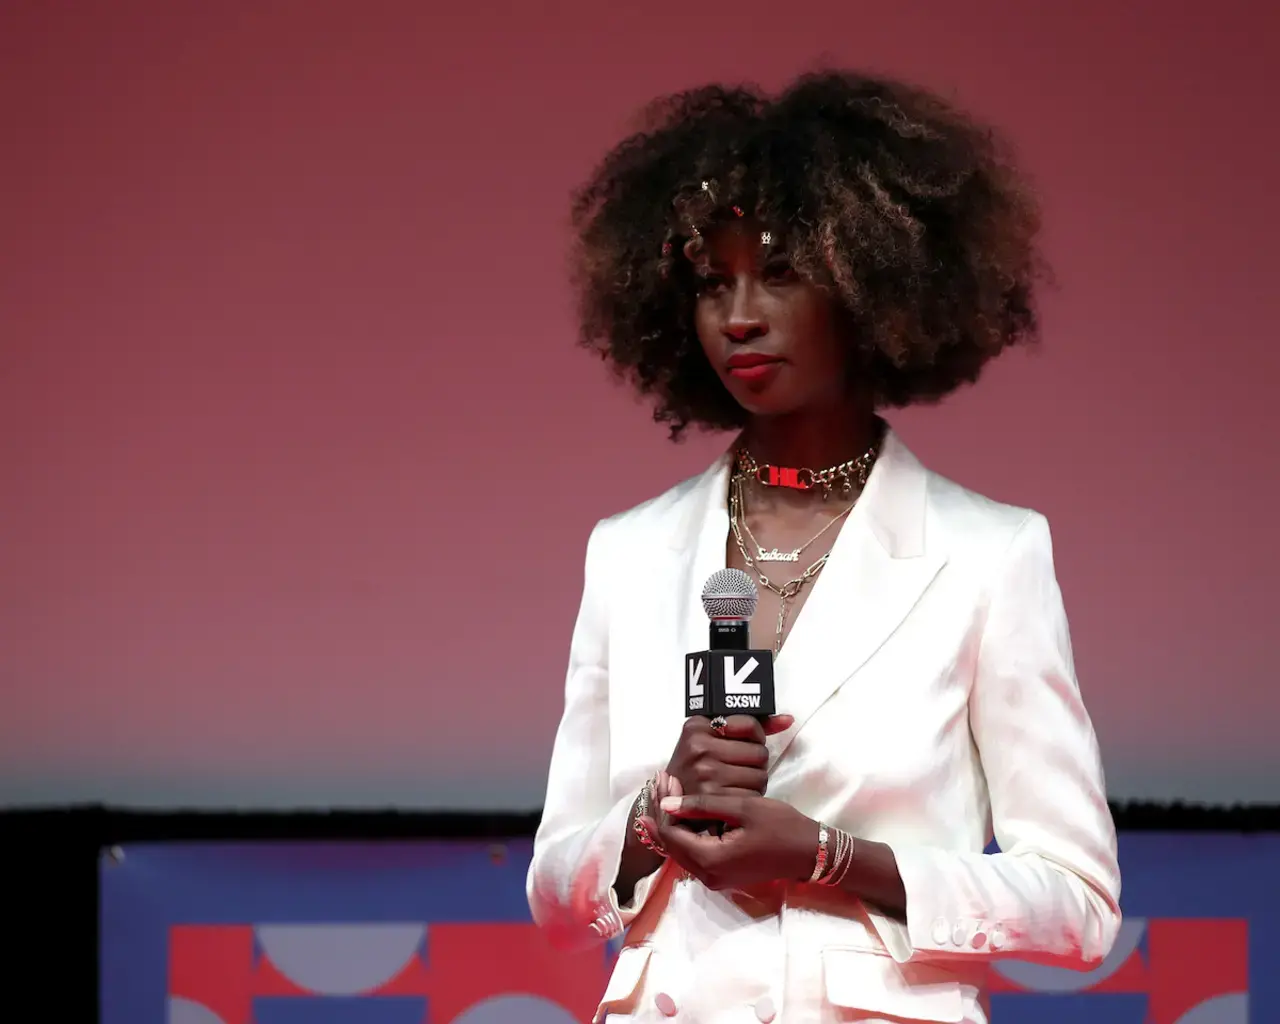 Pew Fellow Sabaah Folayan answers audience questions at the premiere of Look at Me: XXXTentacion, South by Southwest. Photo courtesy of Hulu.